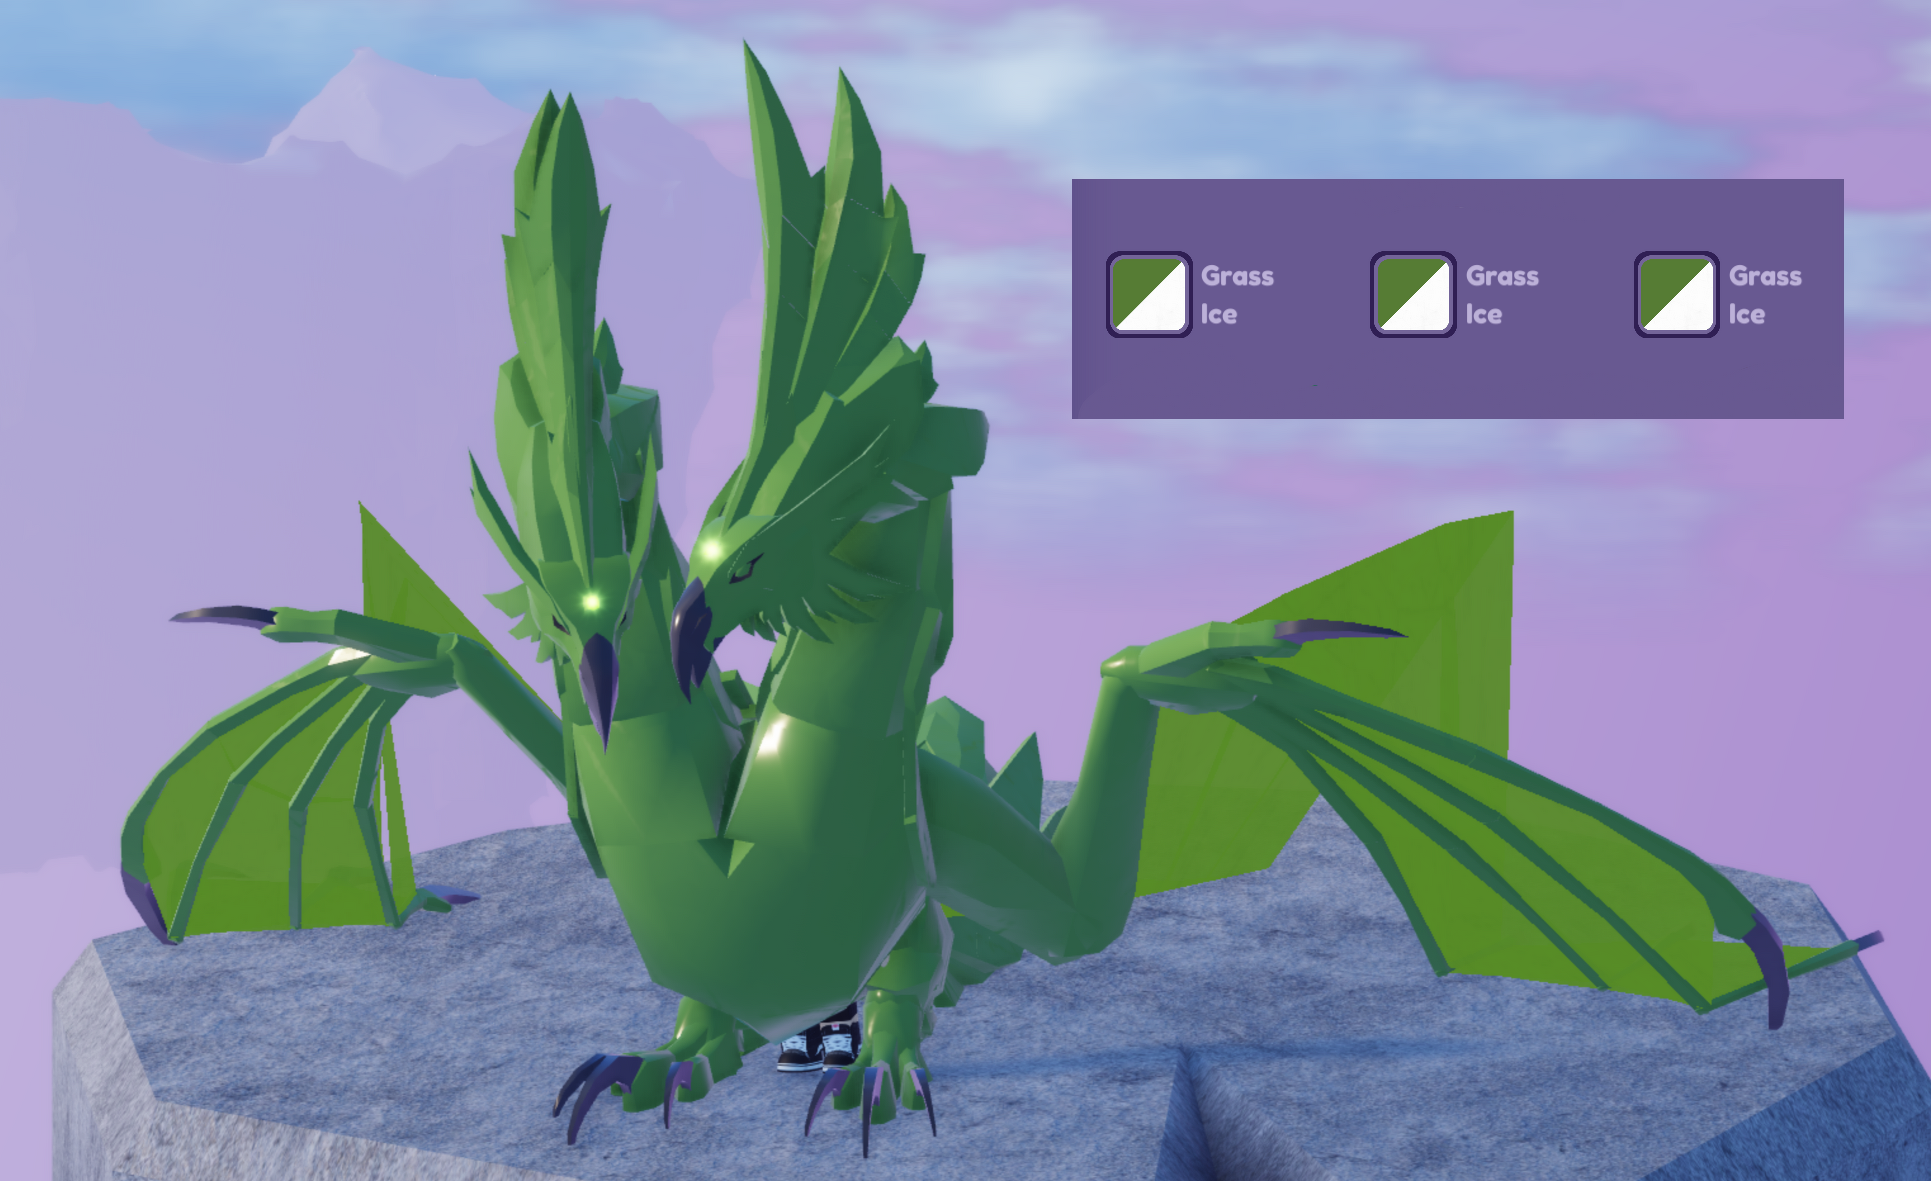 ALL NEW *HALLOWEEN* UPDATE CODES in DRAGON ADVENTURES CODES! (Roblox Dragon  Adventures Codes) 